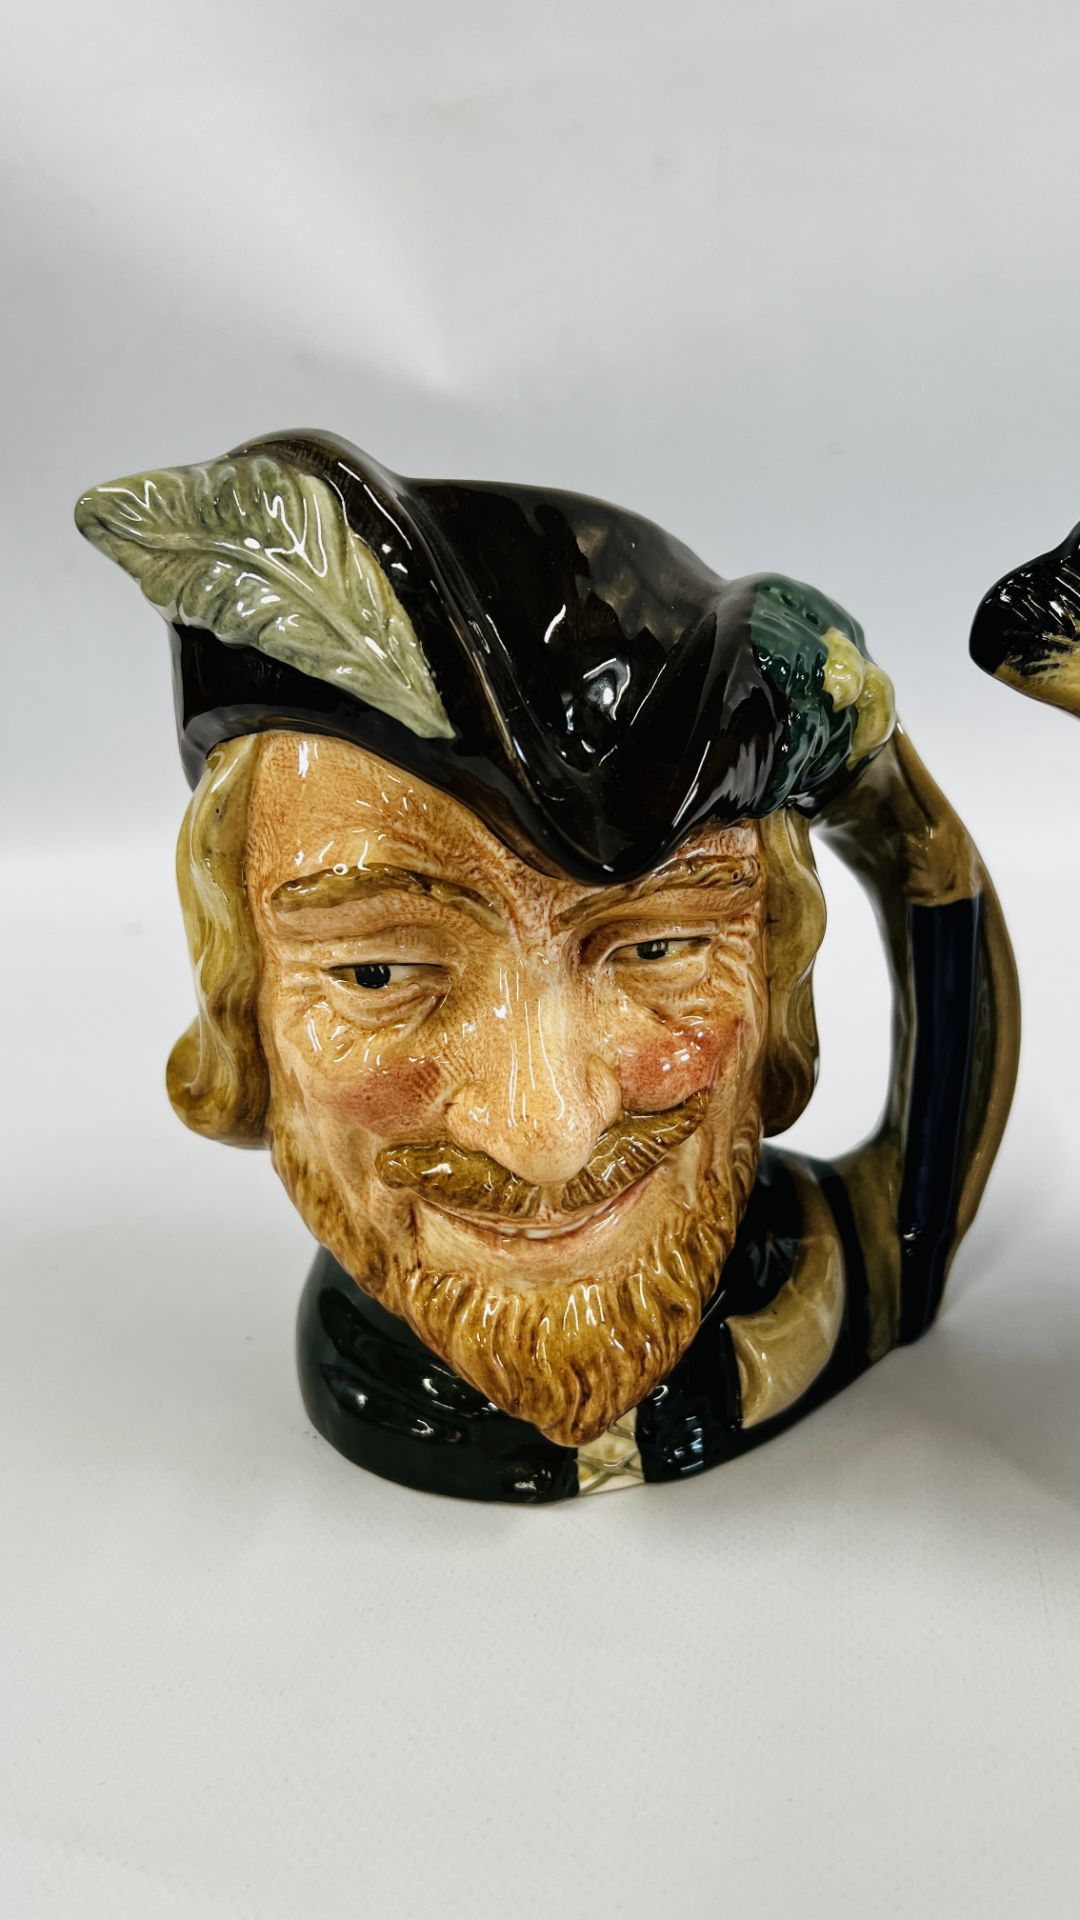 A GROUP OF 5 ROYAL DOULTON CHARACTER JUGS TO INCLUDE THE POACHER D 6429, PIED PIPER D 6403, - Image 6 of 9